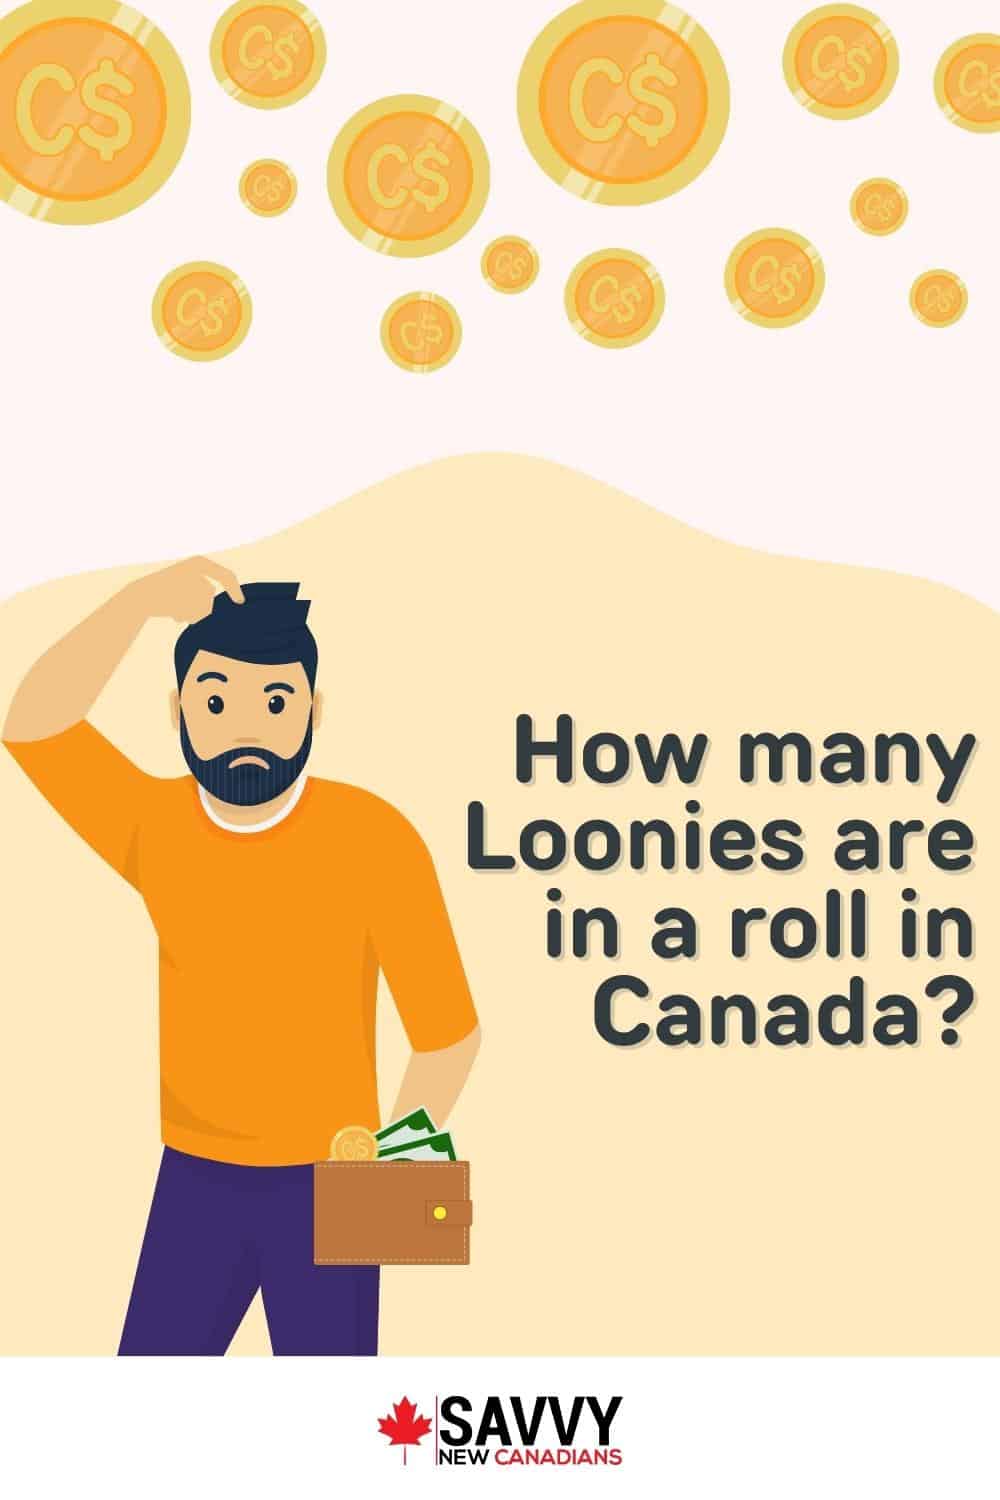 How Many Loonies Are in a Roll in Canada?